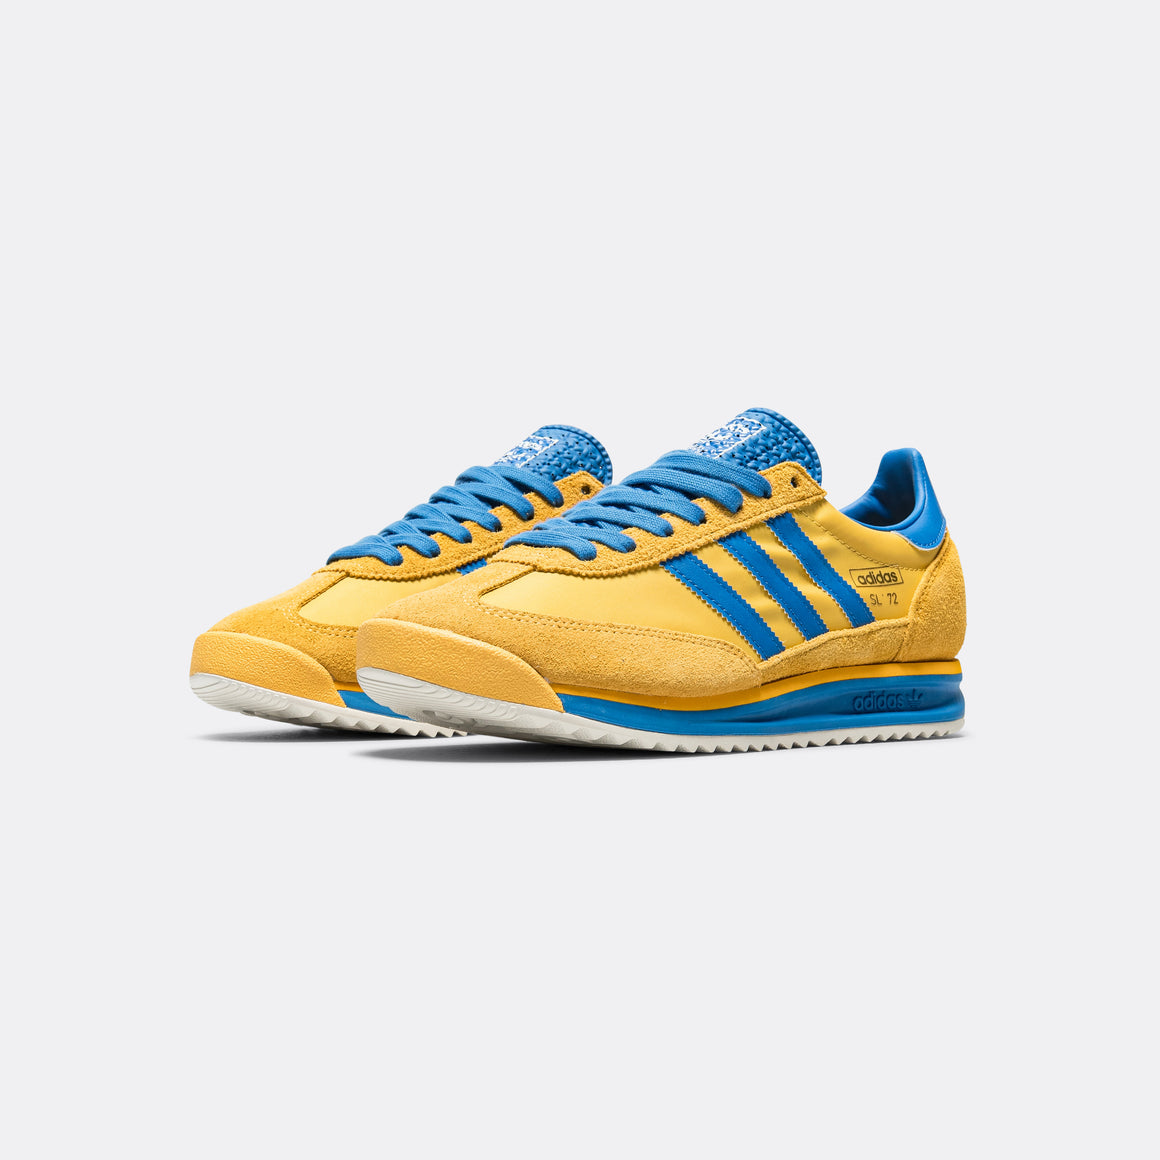 adidas - SL 72 RS - Utility Yellow/Bright Royal-Core White - UP THERE